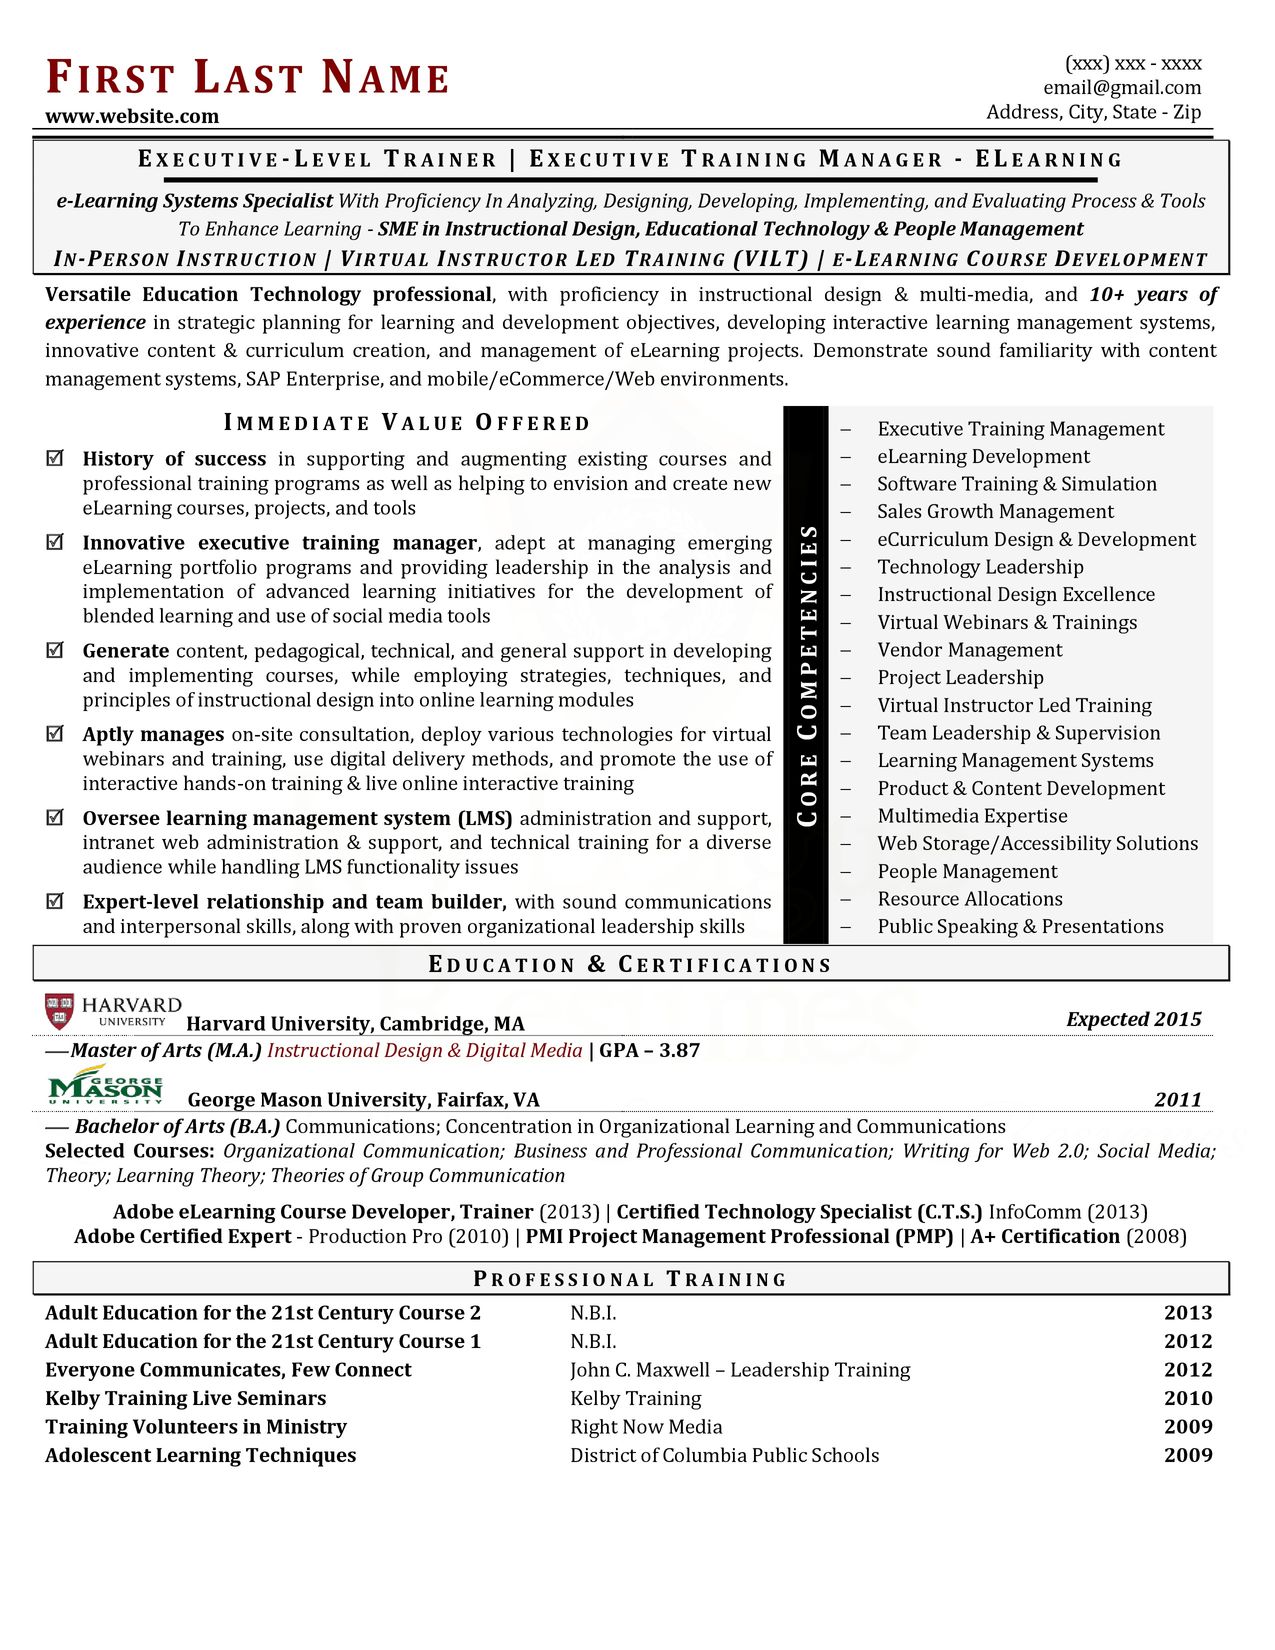 Professional Resume Writing Services In Massachusetts